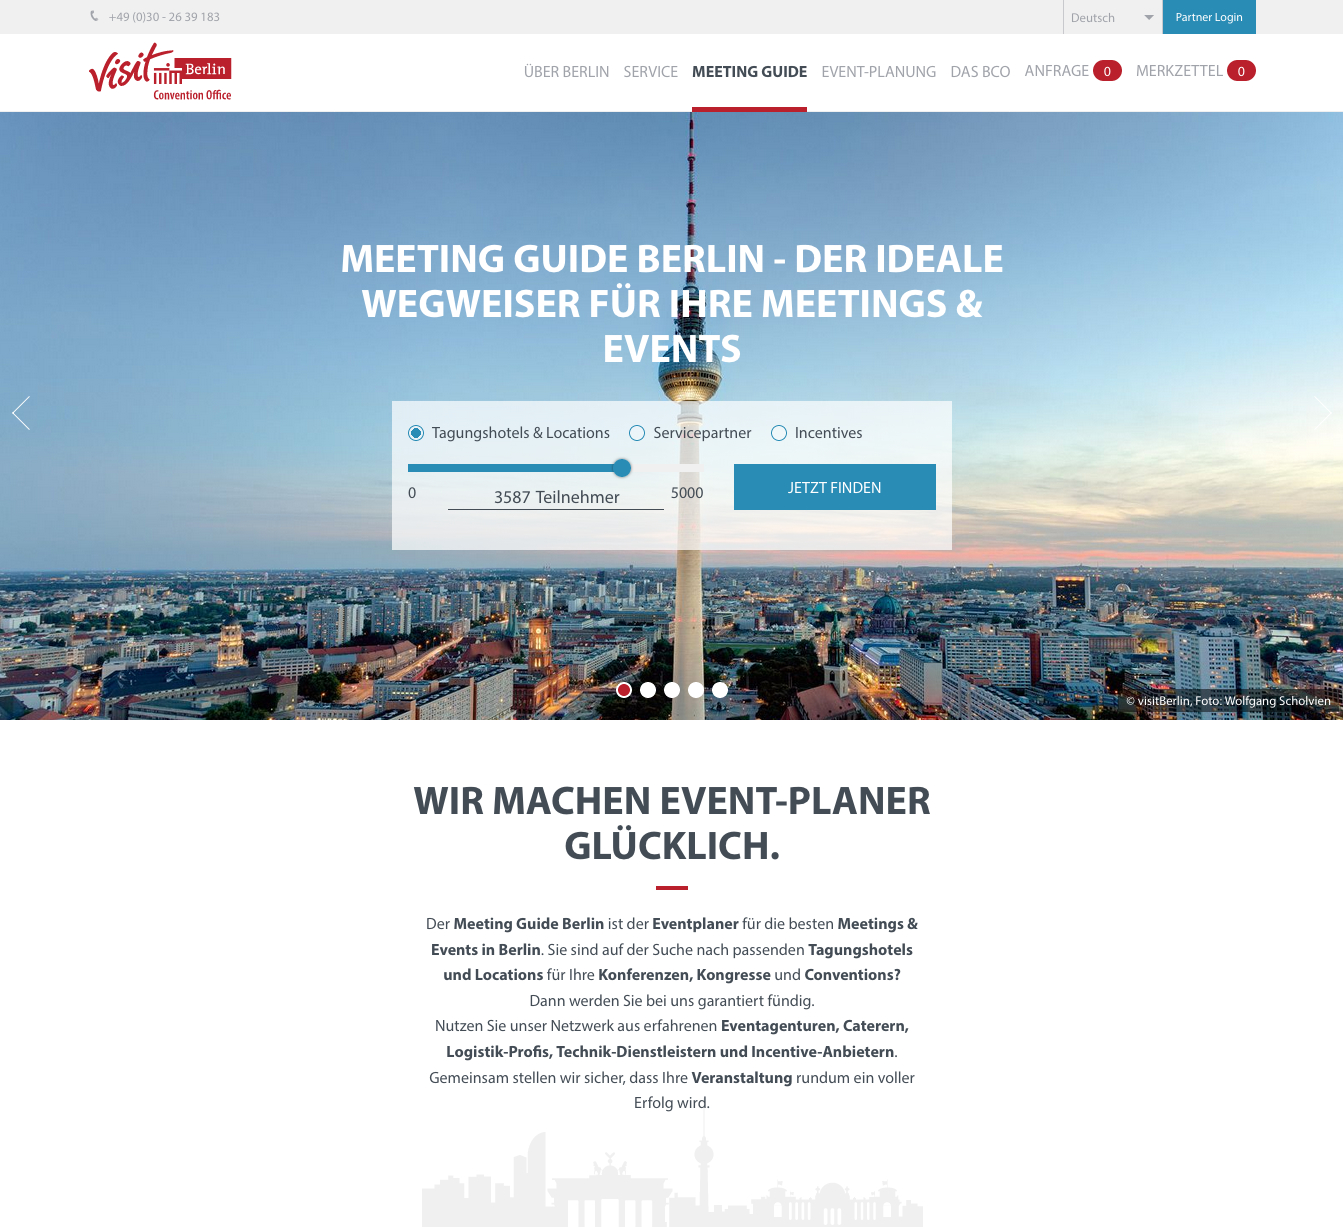 The new Meeting Guide Berlin image